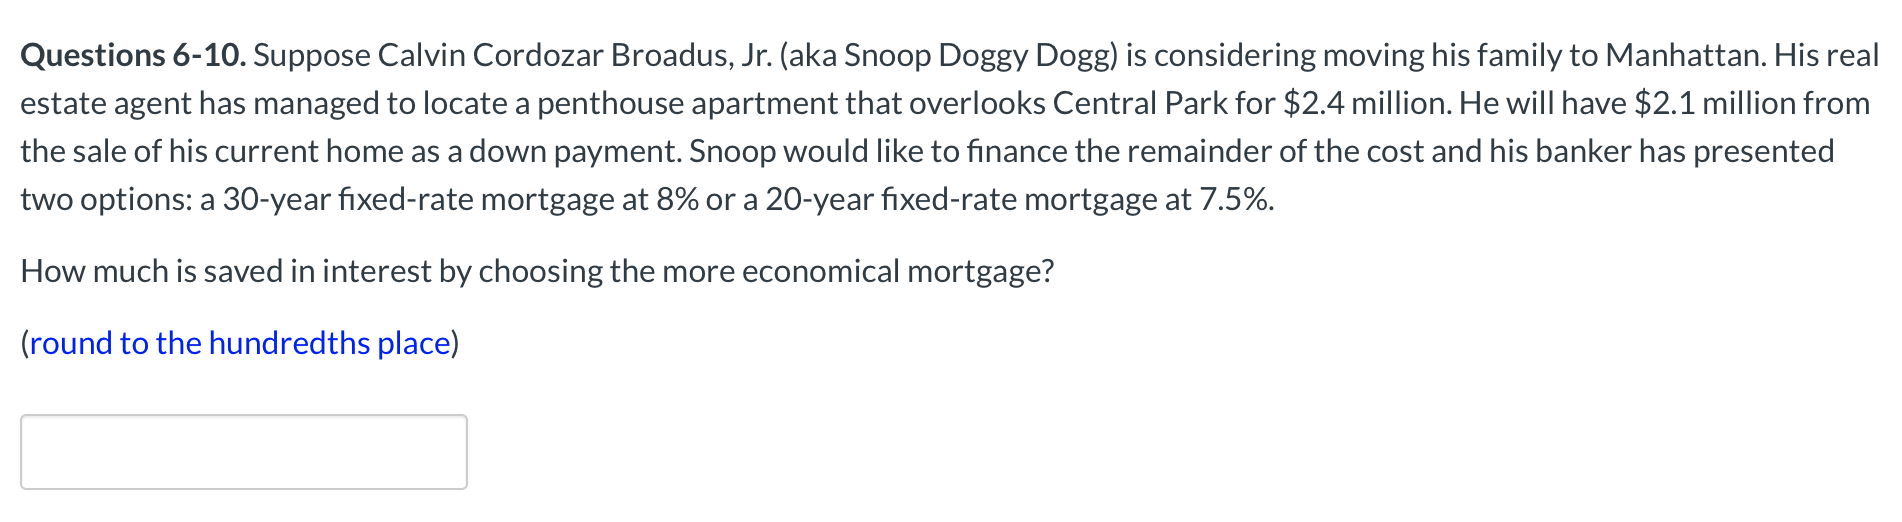 Questions 6-10. Suppose Calvin Cordozar Broadus, Jr. (aka Snoop Doggy Dogg) is considering moving his family to Manhattan. His real
estate agent has managed to locate a penthouse apartment that overlooks Central Park for $2.4 million. He will have $2.1 million from
the sale of his current home as a down payment. Snoop would like to finance the remainder of the cost and his banker has presented
two options: a 30-year fixed-rate mortgage at 8% or a 20-year fixed-rate mortgage at 7.5%.
How much is saved in interest by choosing the more economical mortgage?
(round to the hundredths place)
